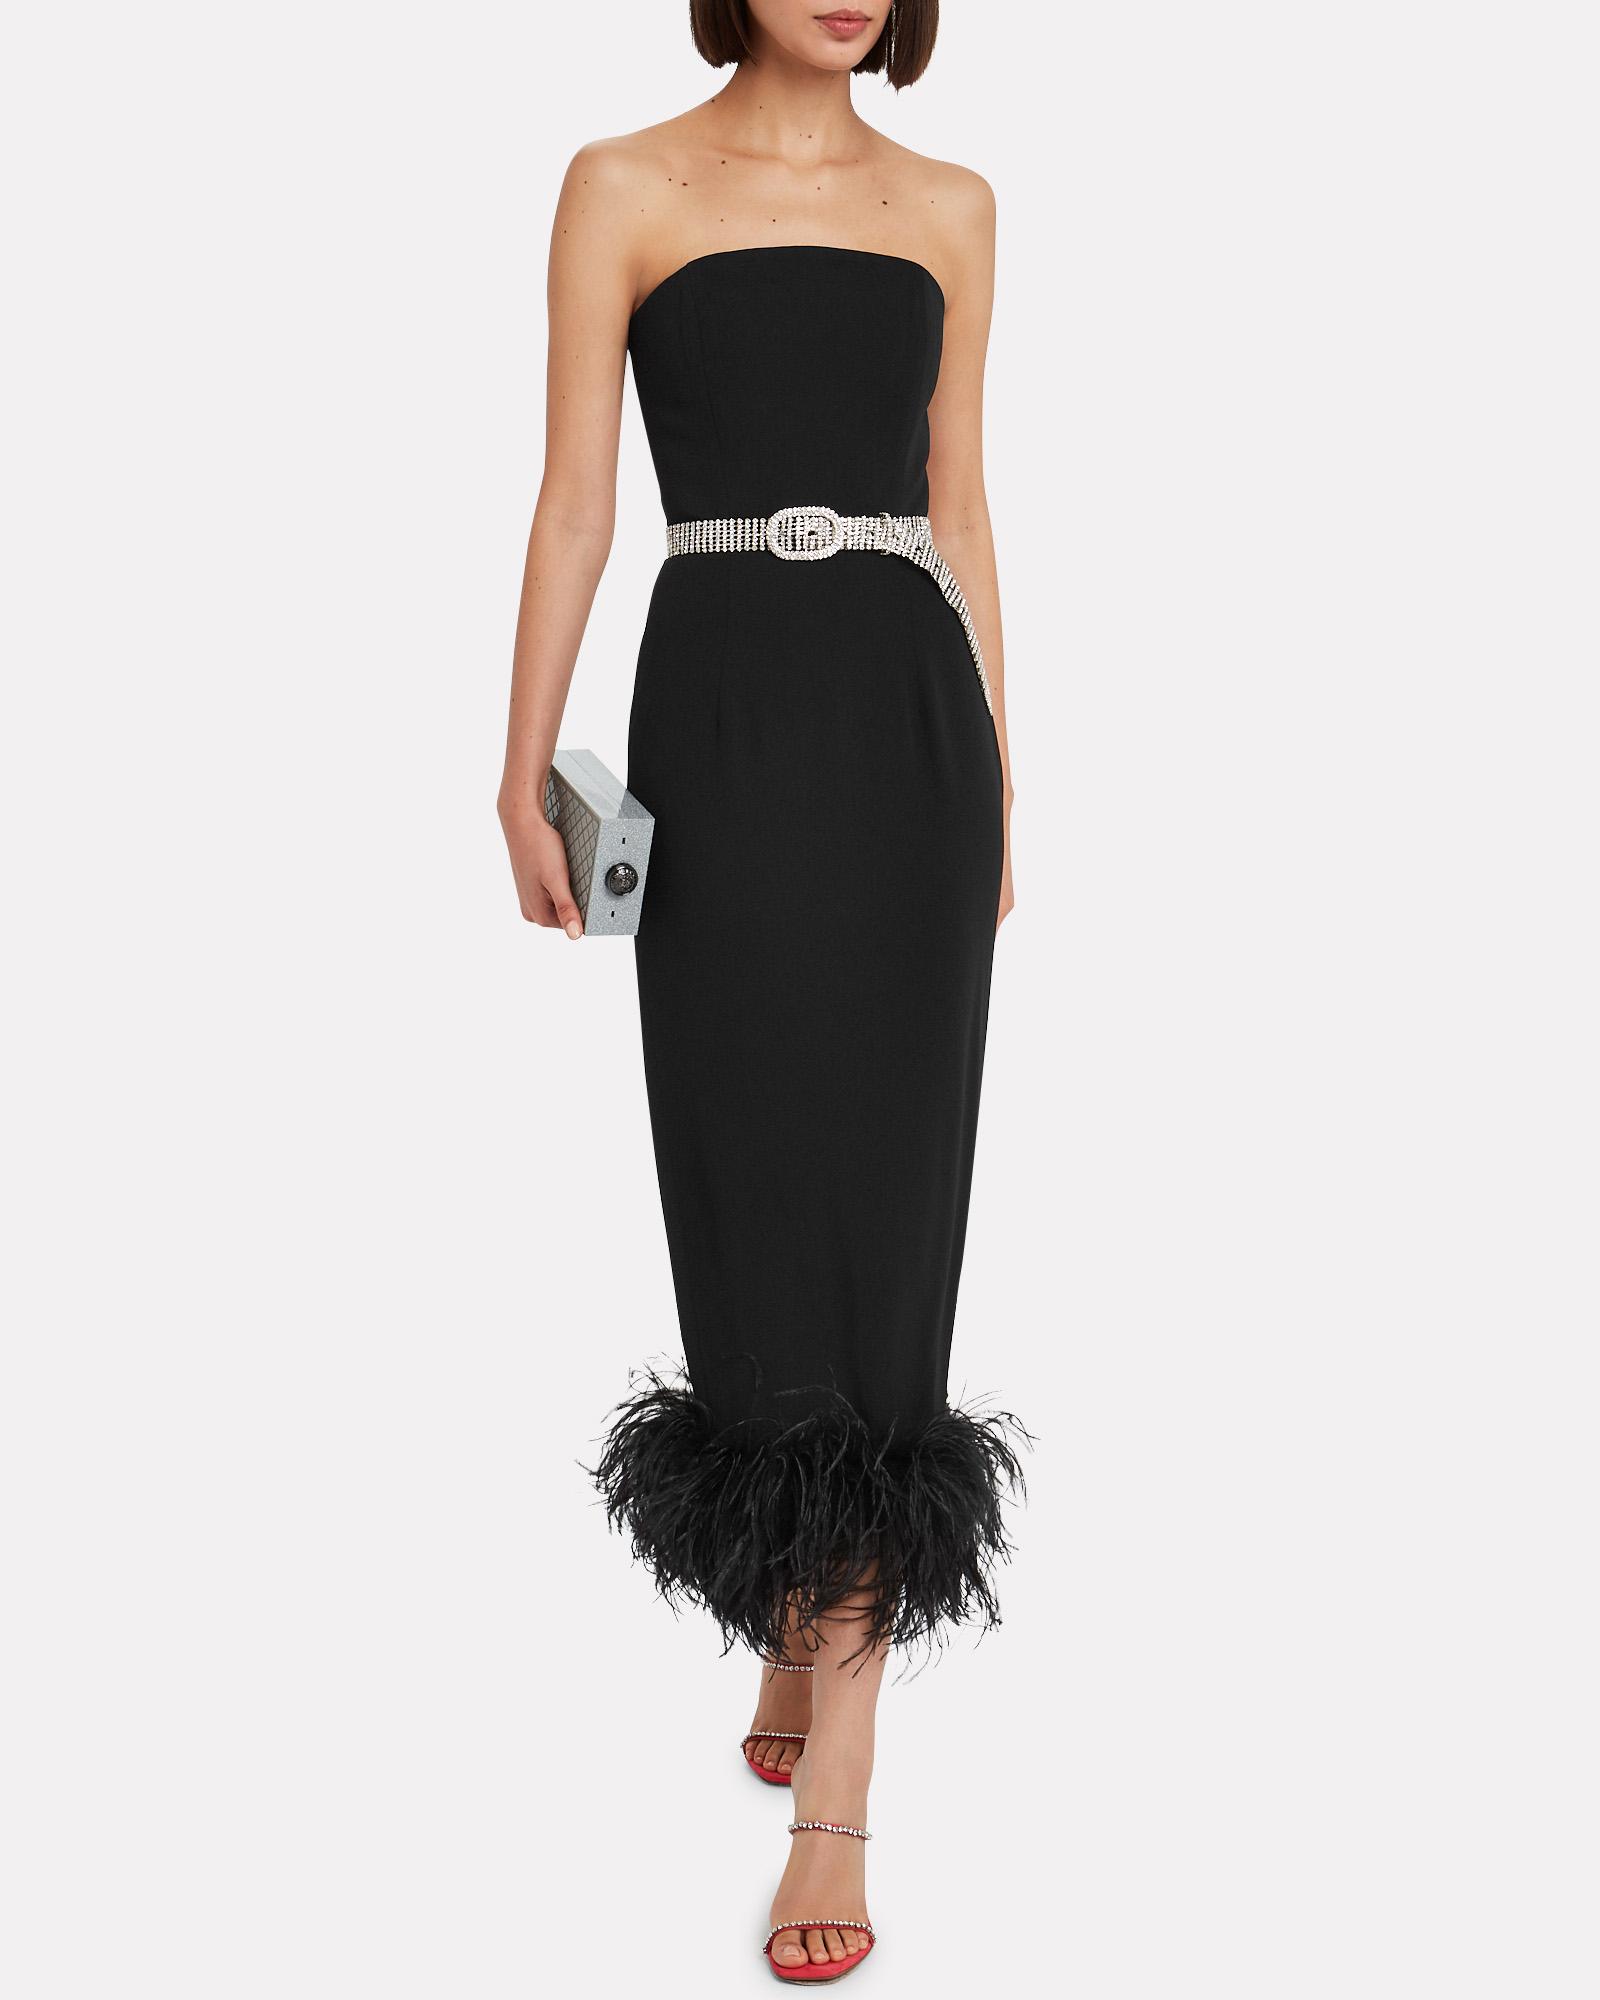 16Arlington Minelli Feather Trimmed Strapless Dress in Black | Lyst